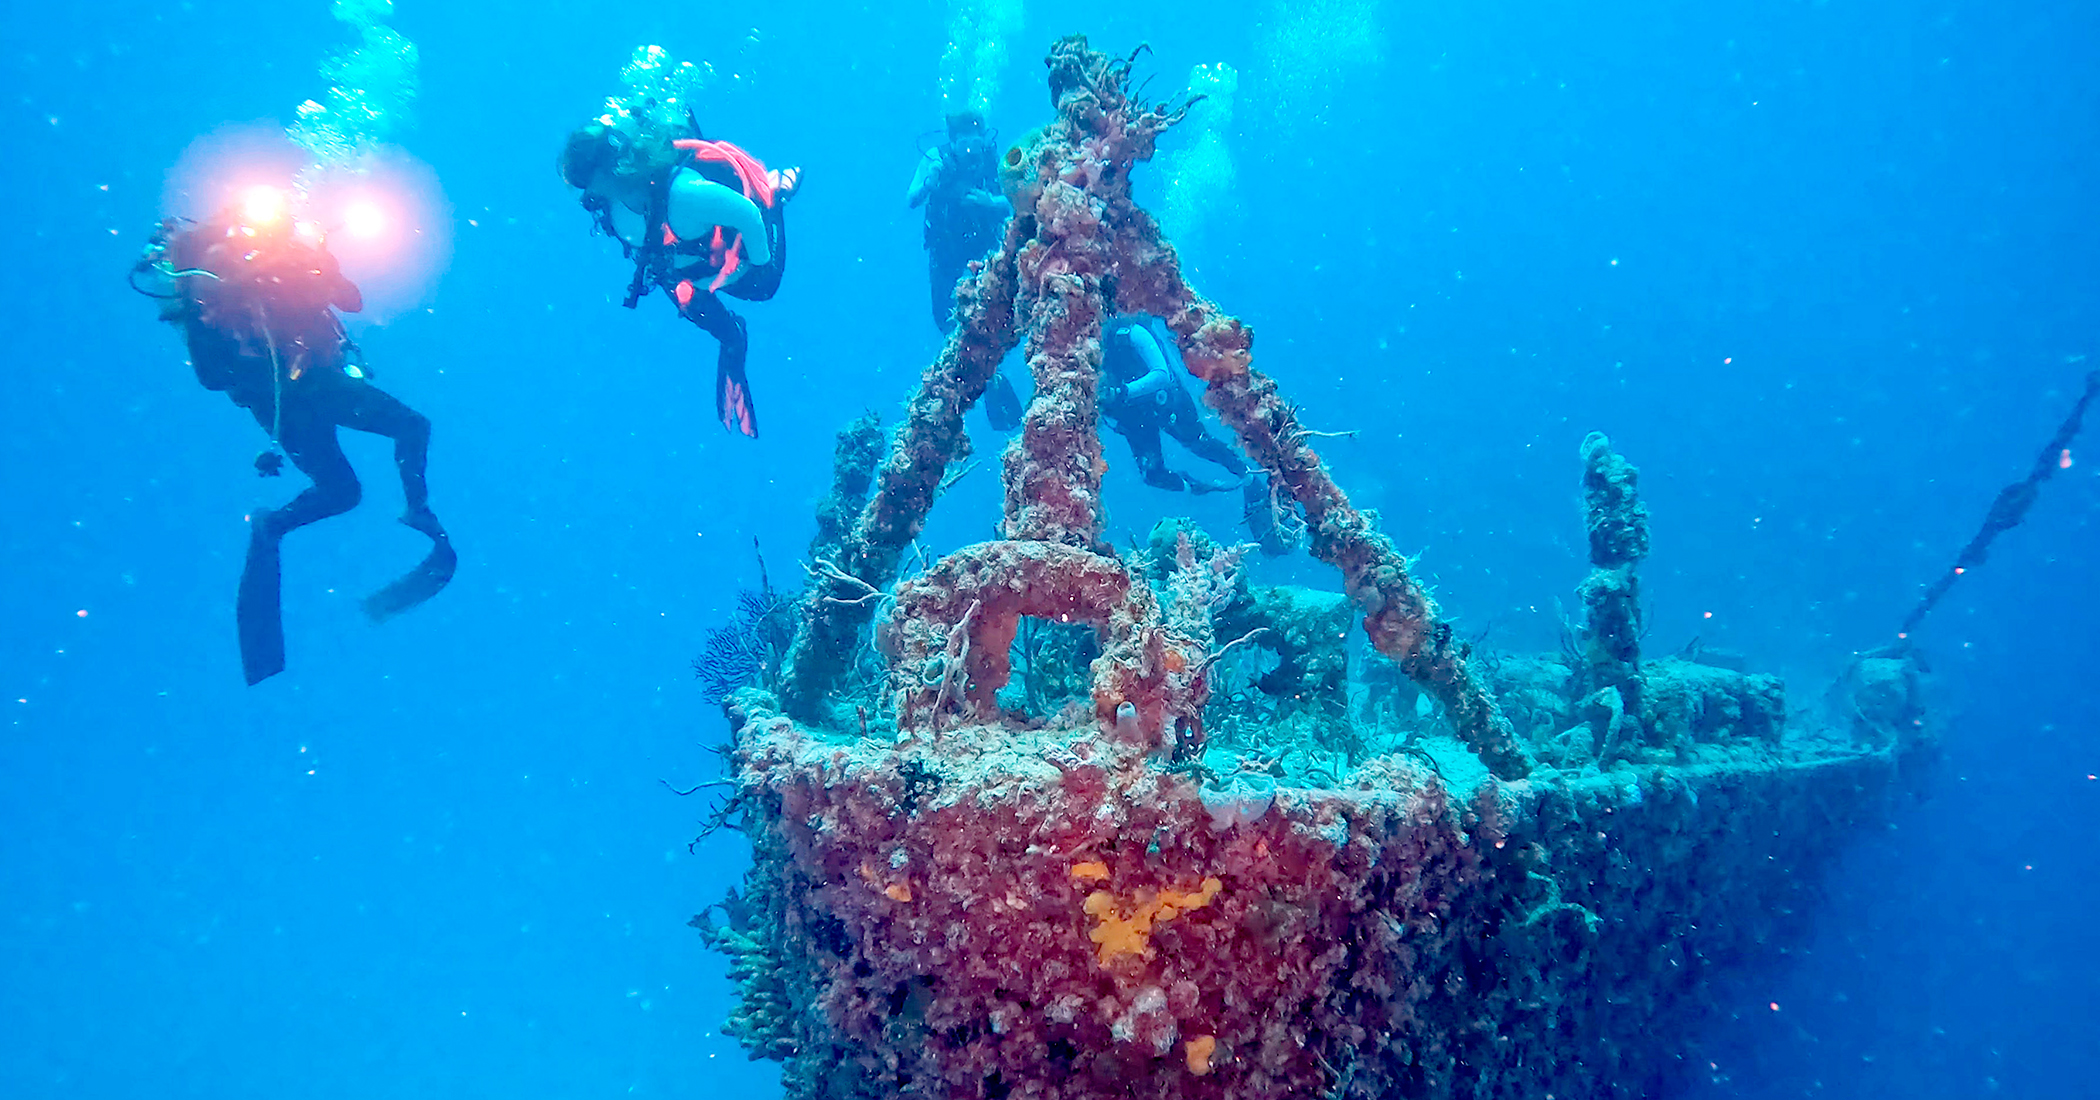 Divers revisit Navy ship sunk to make artificial reef in Florida Keys 20 years ago